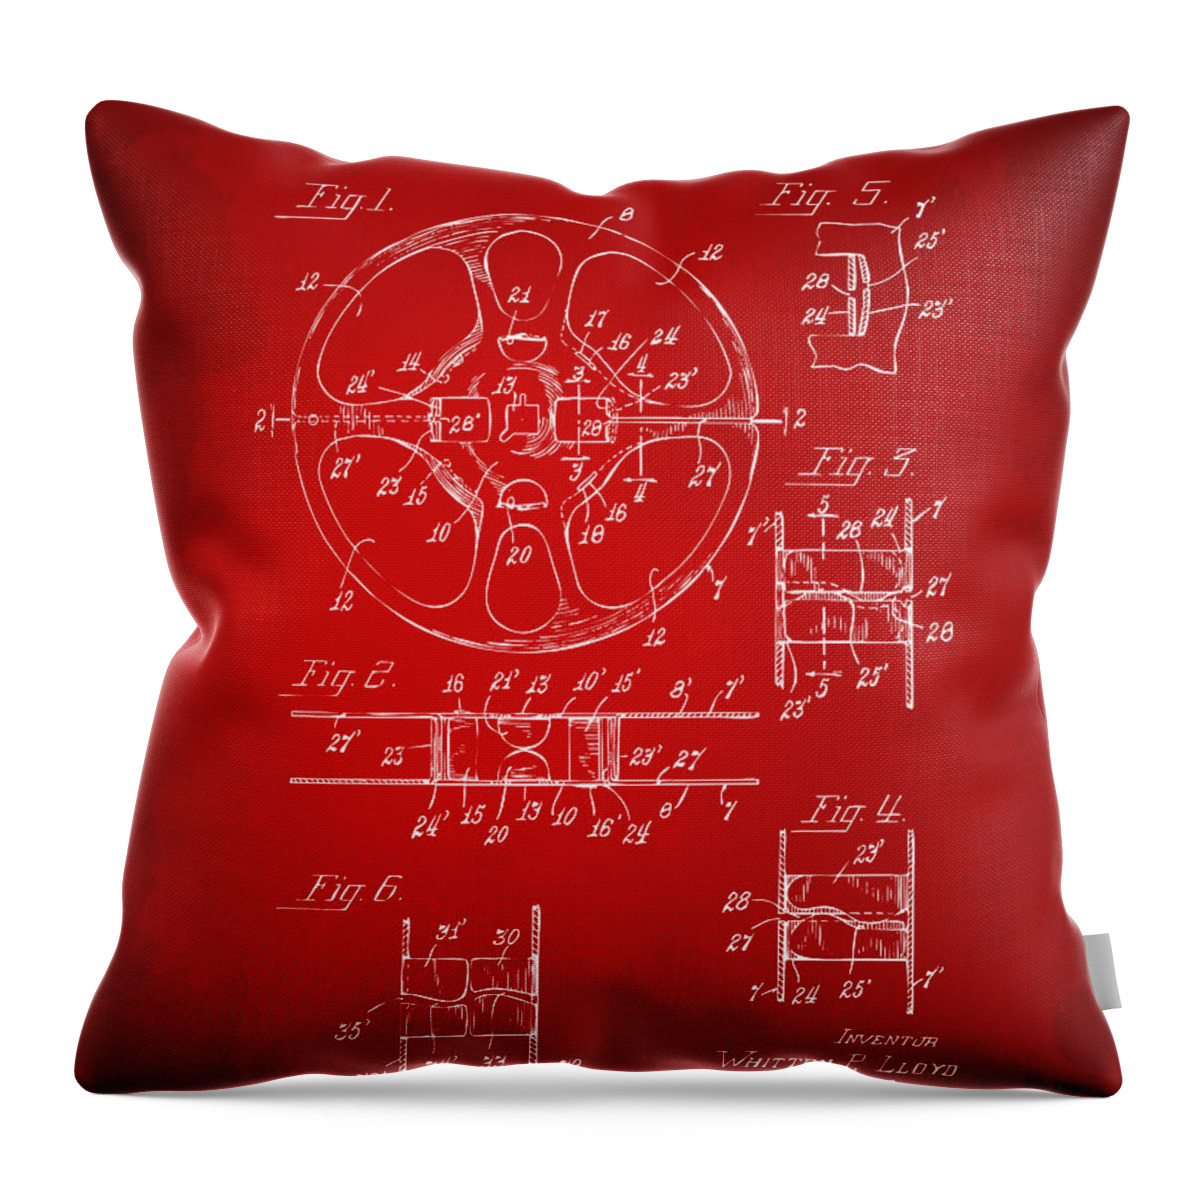 Movie Throw Pillow featuring the digital art 1949 Movie Film Reel Patent Artwork - Red by Nikki Marie Smith